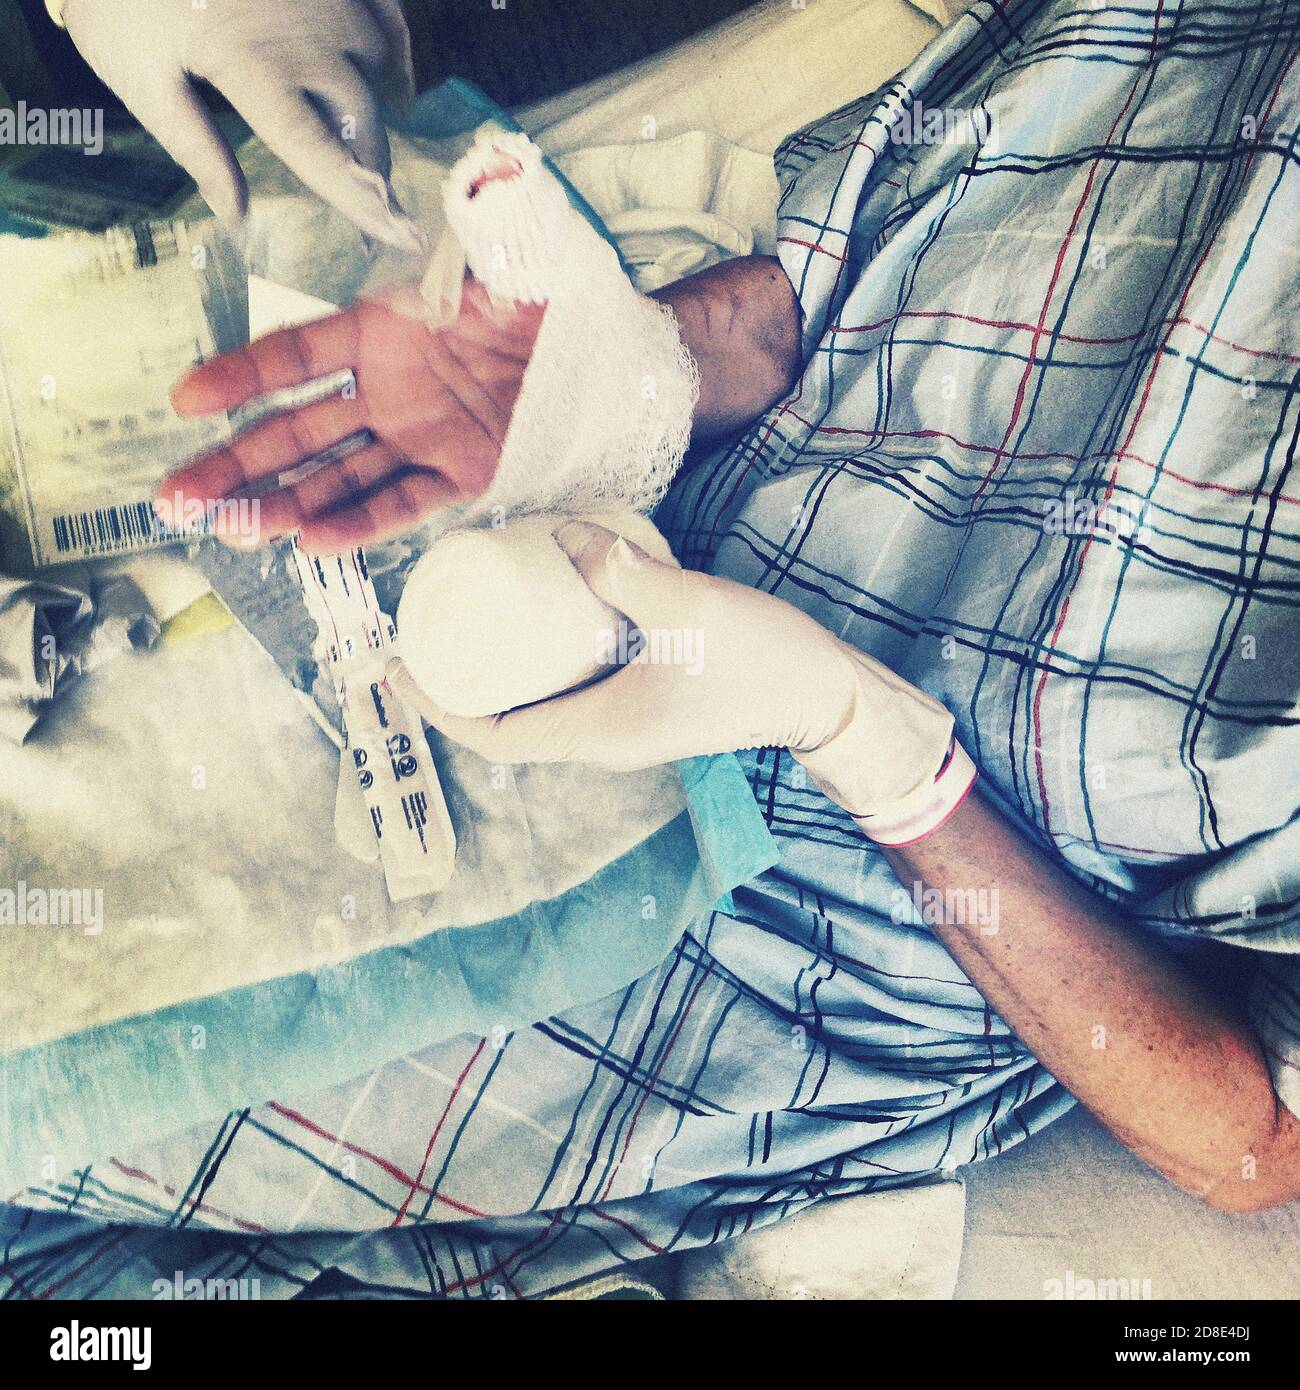 High Angle View of Woman with Injured Hand in Hospital Bed Stock Photo